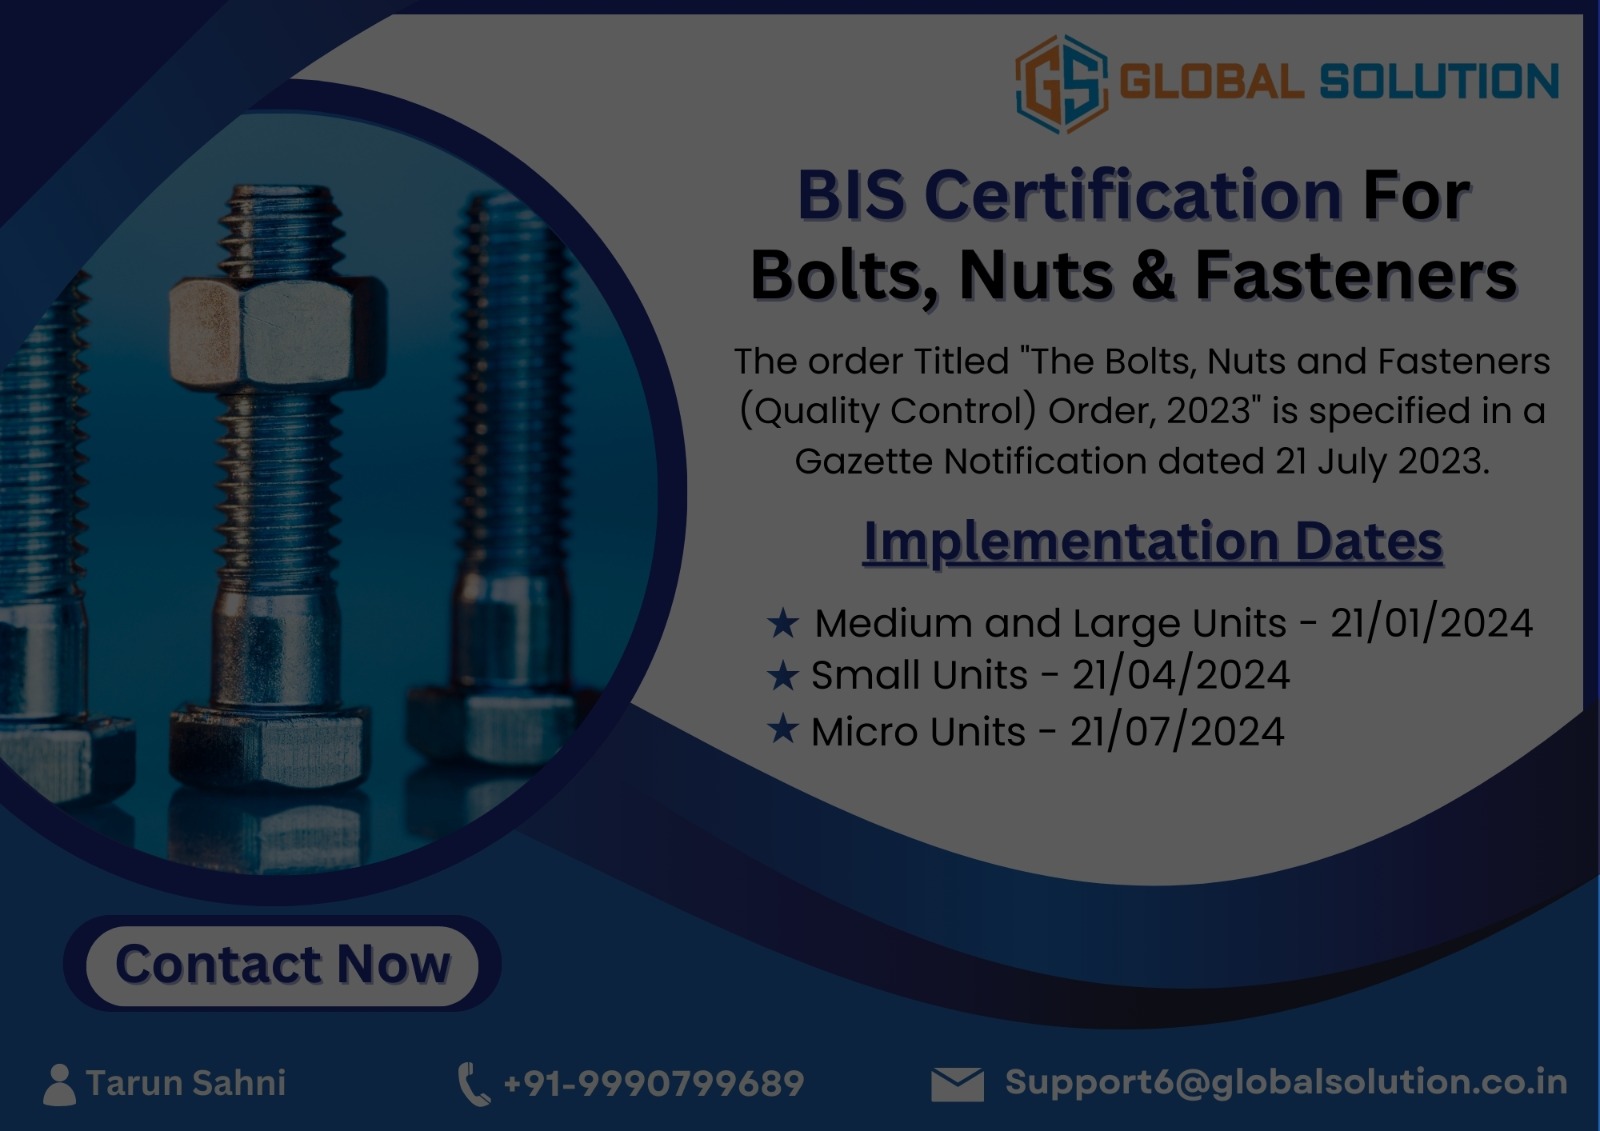 BIS Certification For Bolts, Nuts & Fasteners